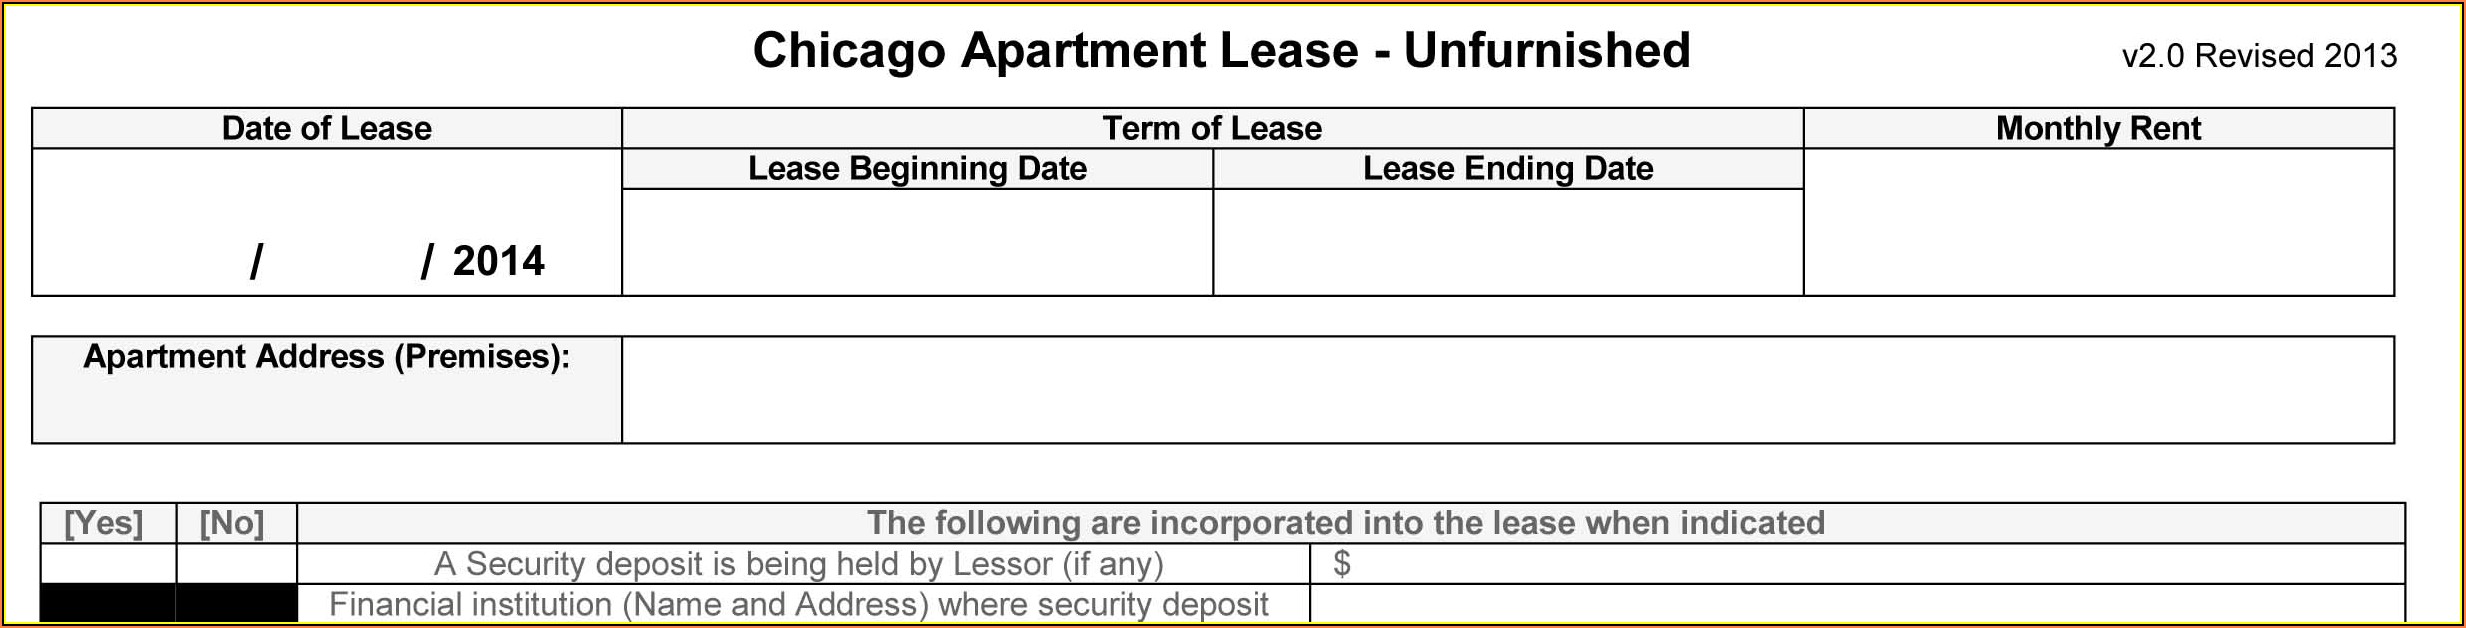 Unfurnished Chicago Apartment Lease Form